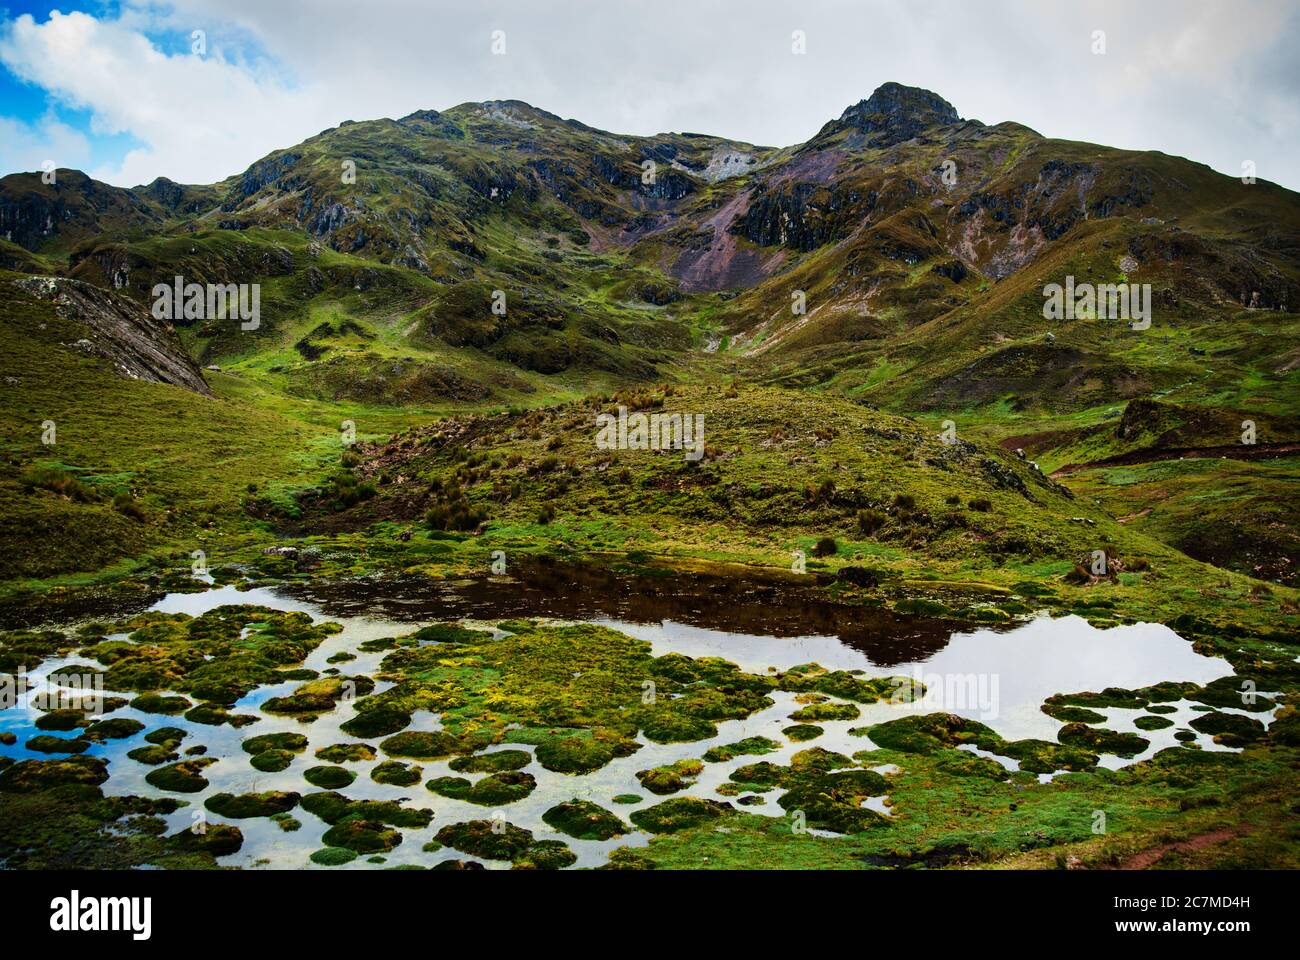 mountain landscape with pond, Chaullacocha village, Andes Mountains, Peru, South America Stock Photo